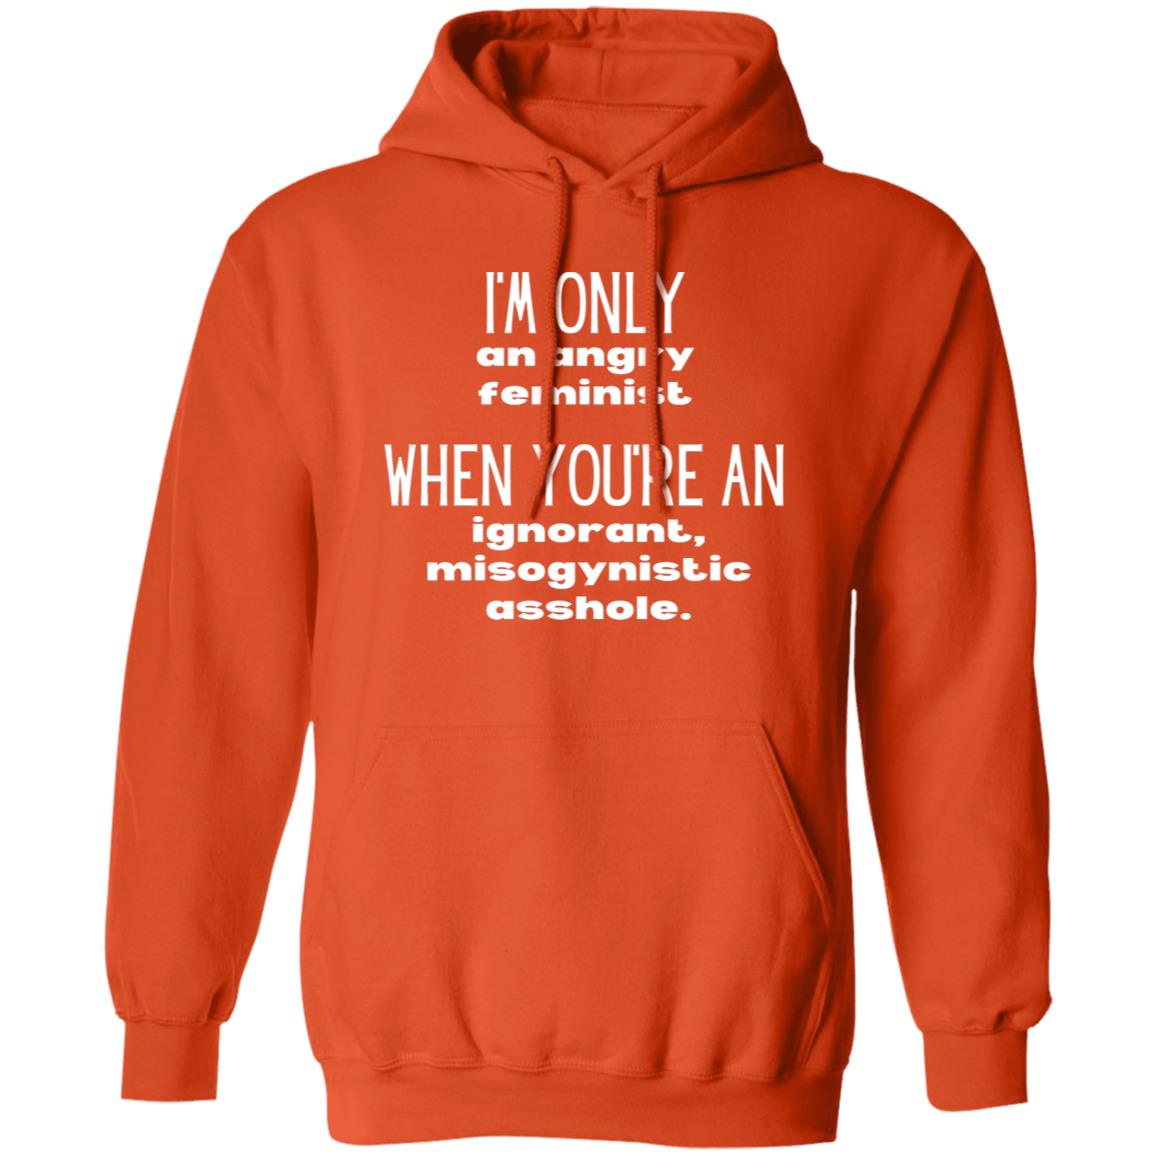 I'm Only An Angry Feminist Hooded Sweatshirt